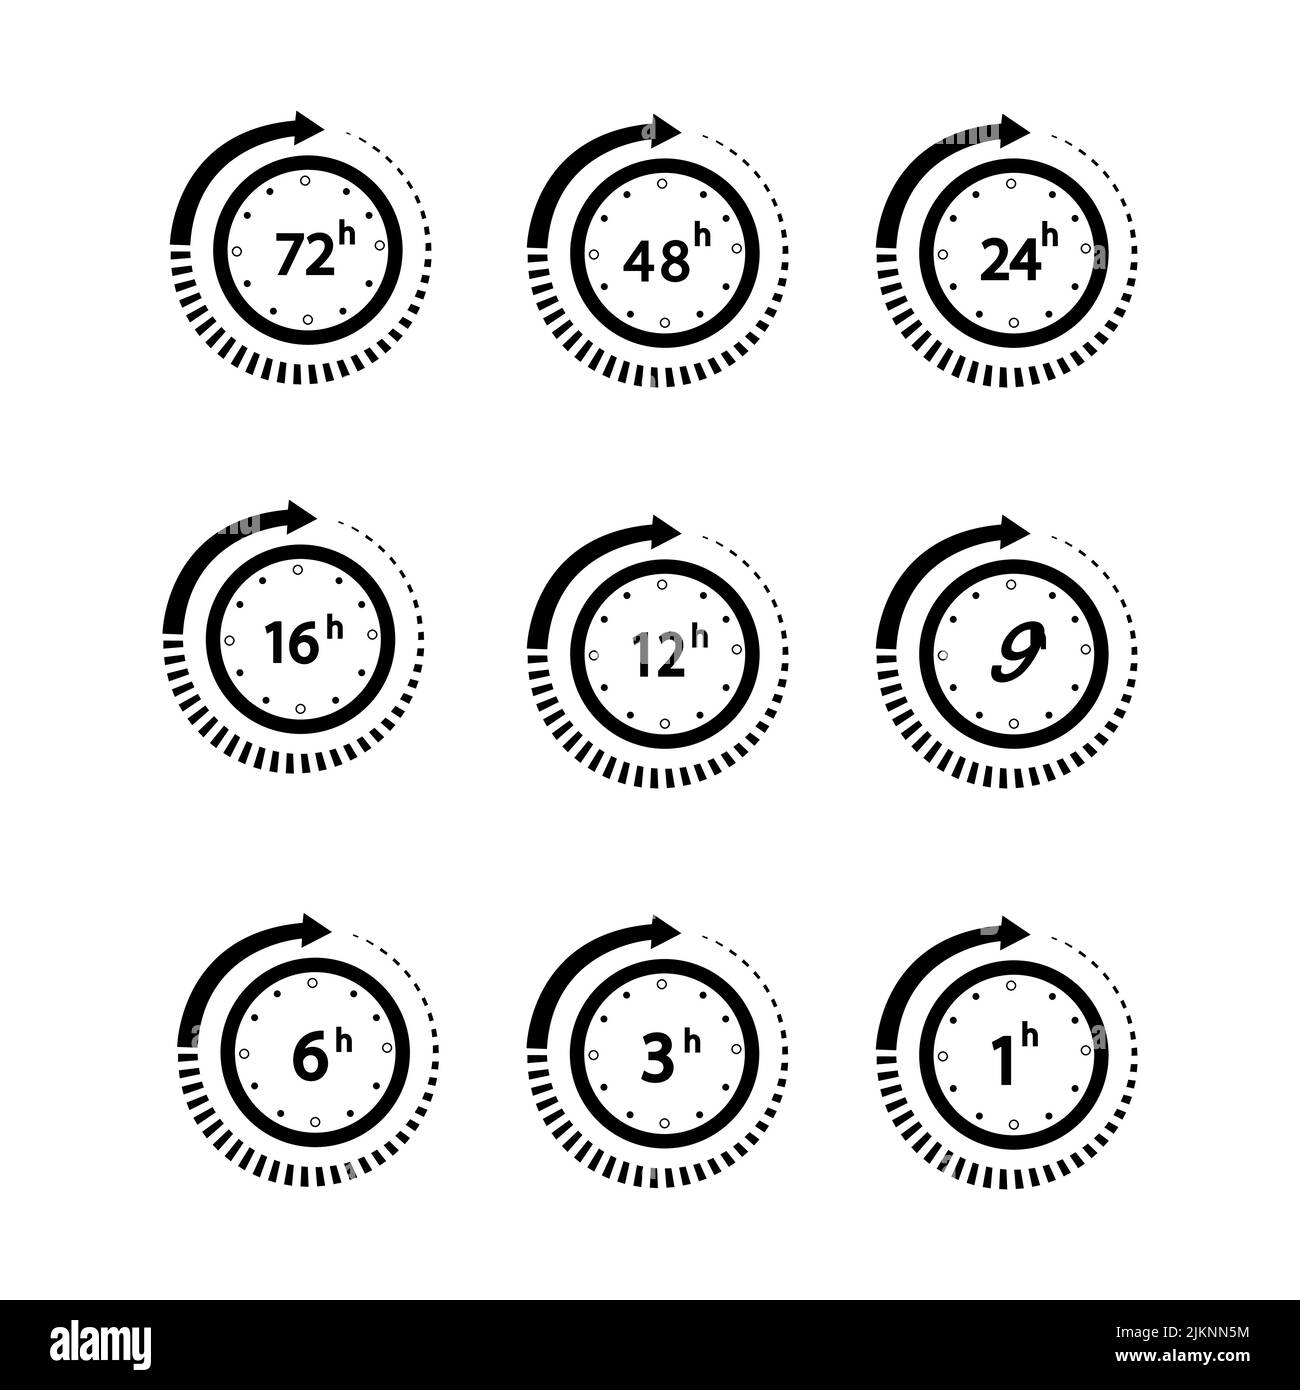 Set of arrows clock and time icons. 1, 3, 6, 9, 12, 16, 24 48 72 hours Stock Vector